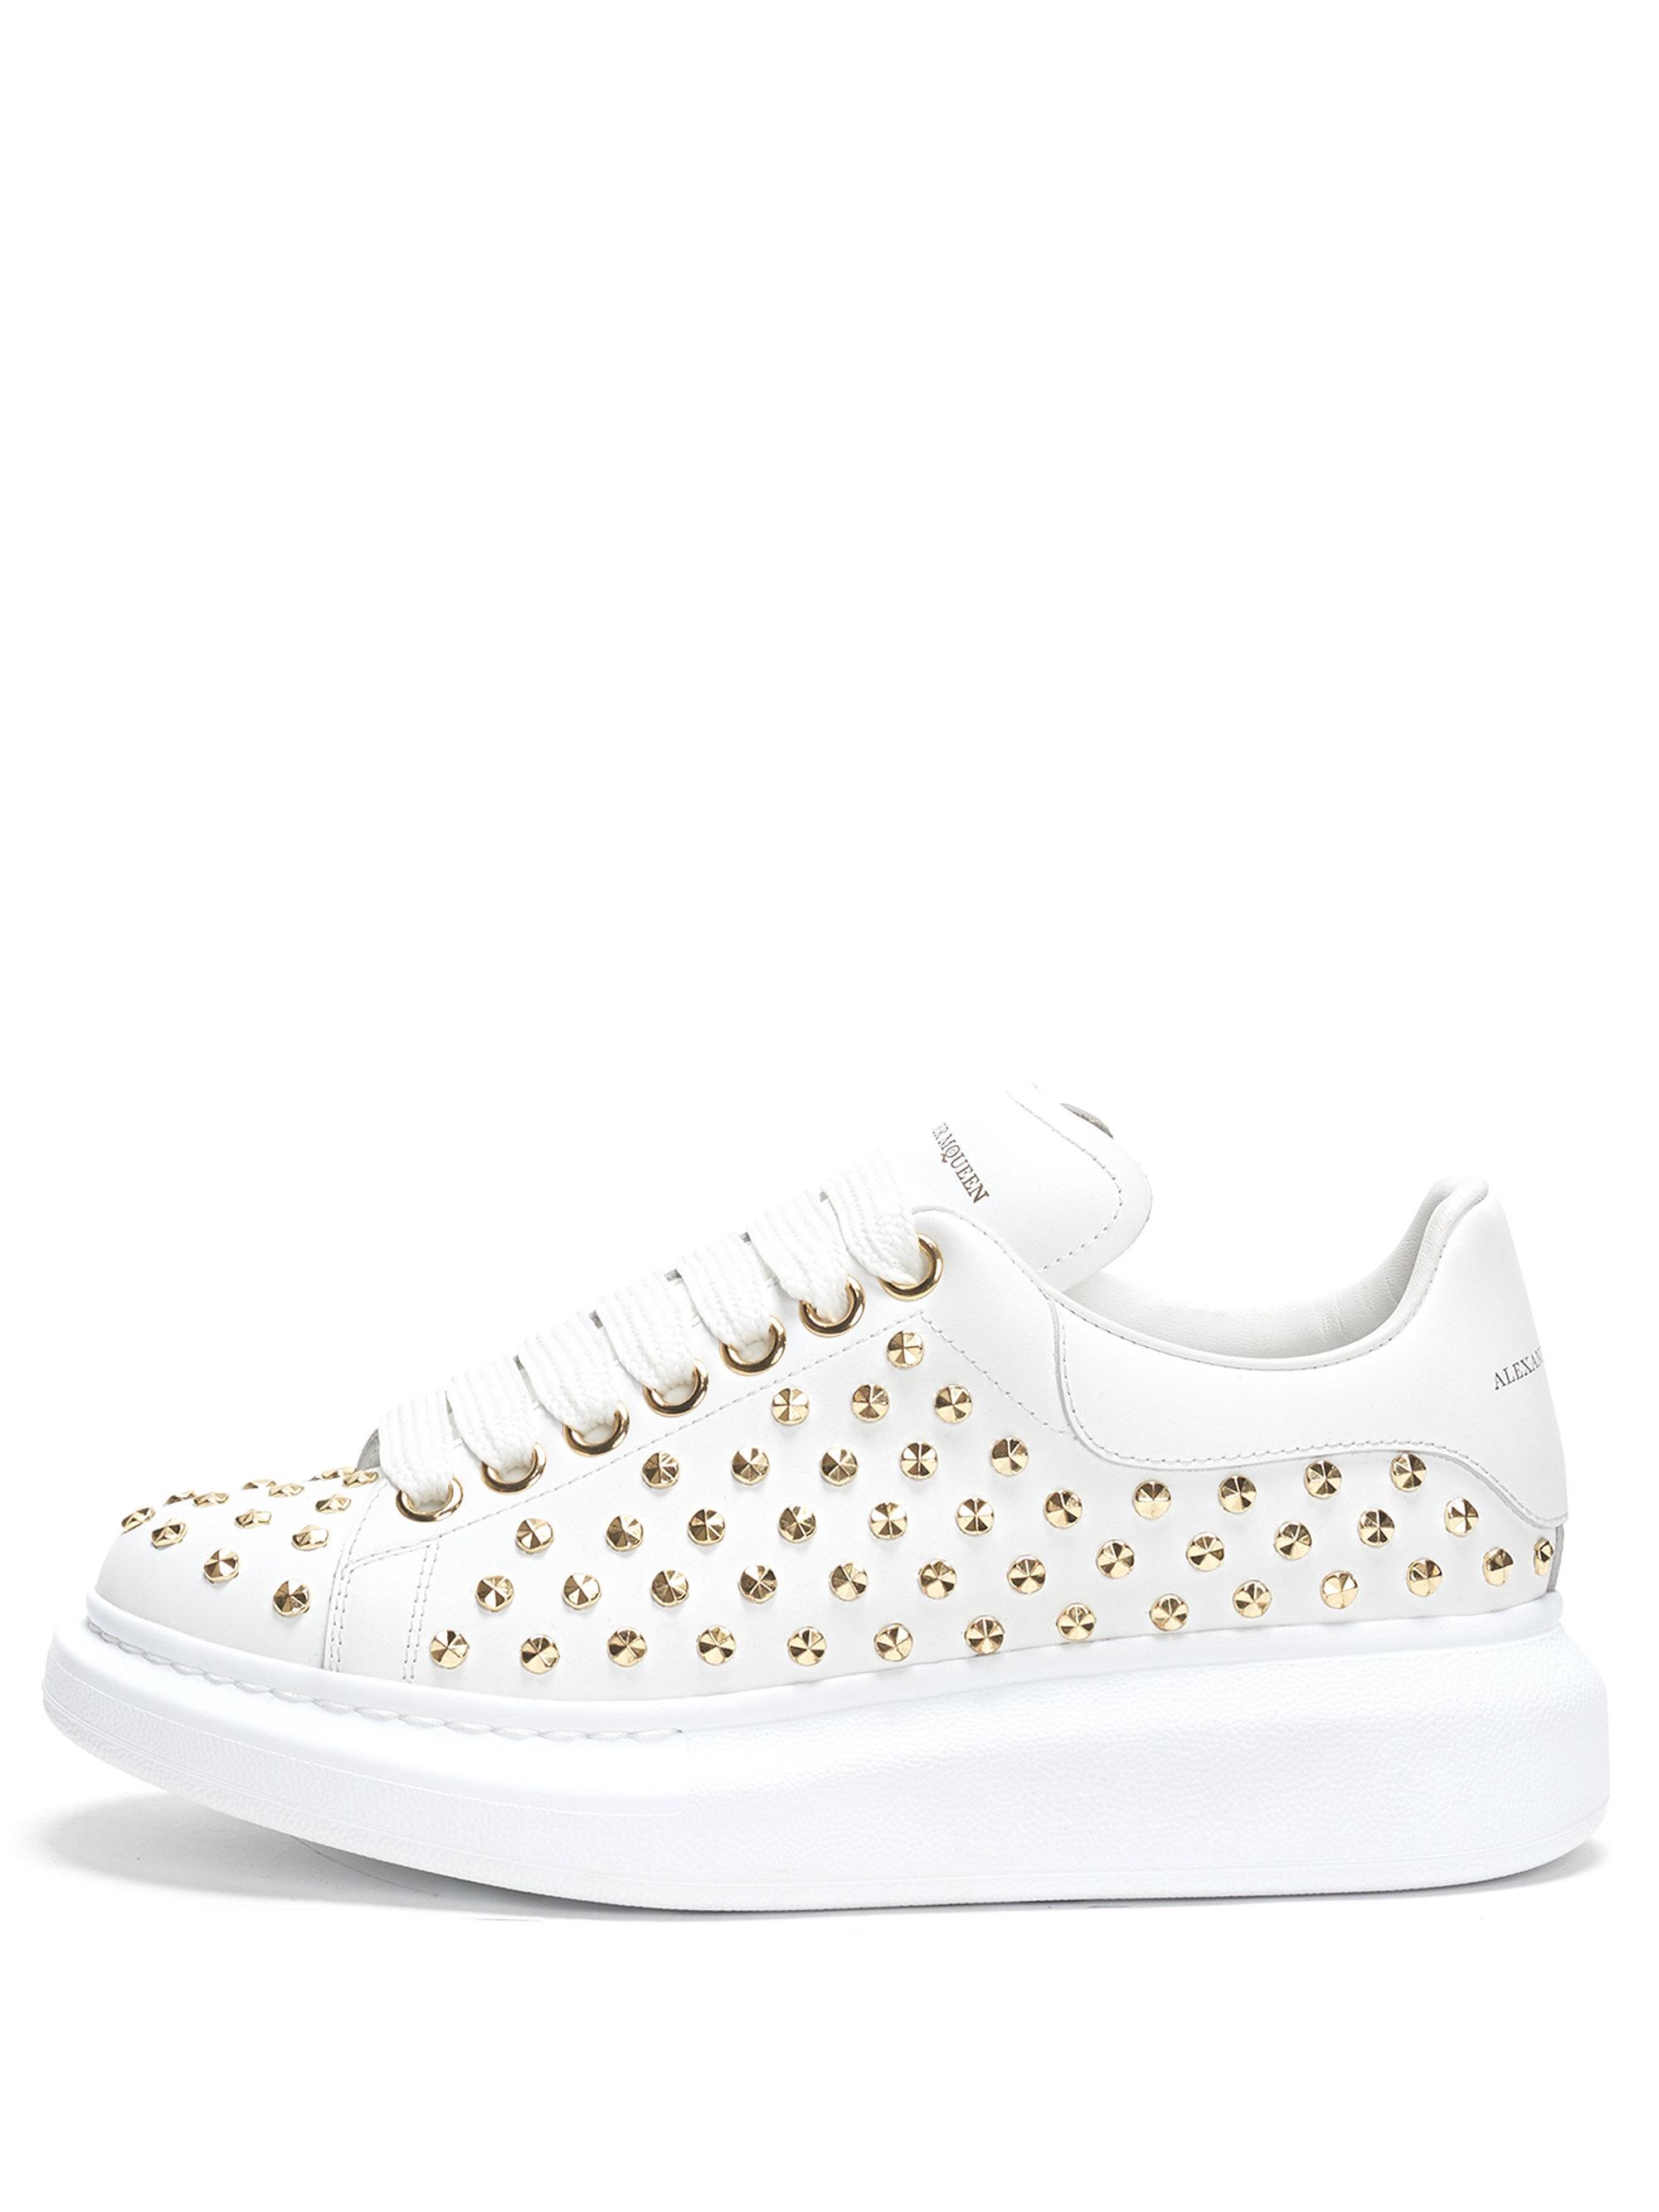 Alexander McQueen Spike-studded Leather Platform Sneakers in White 